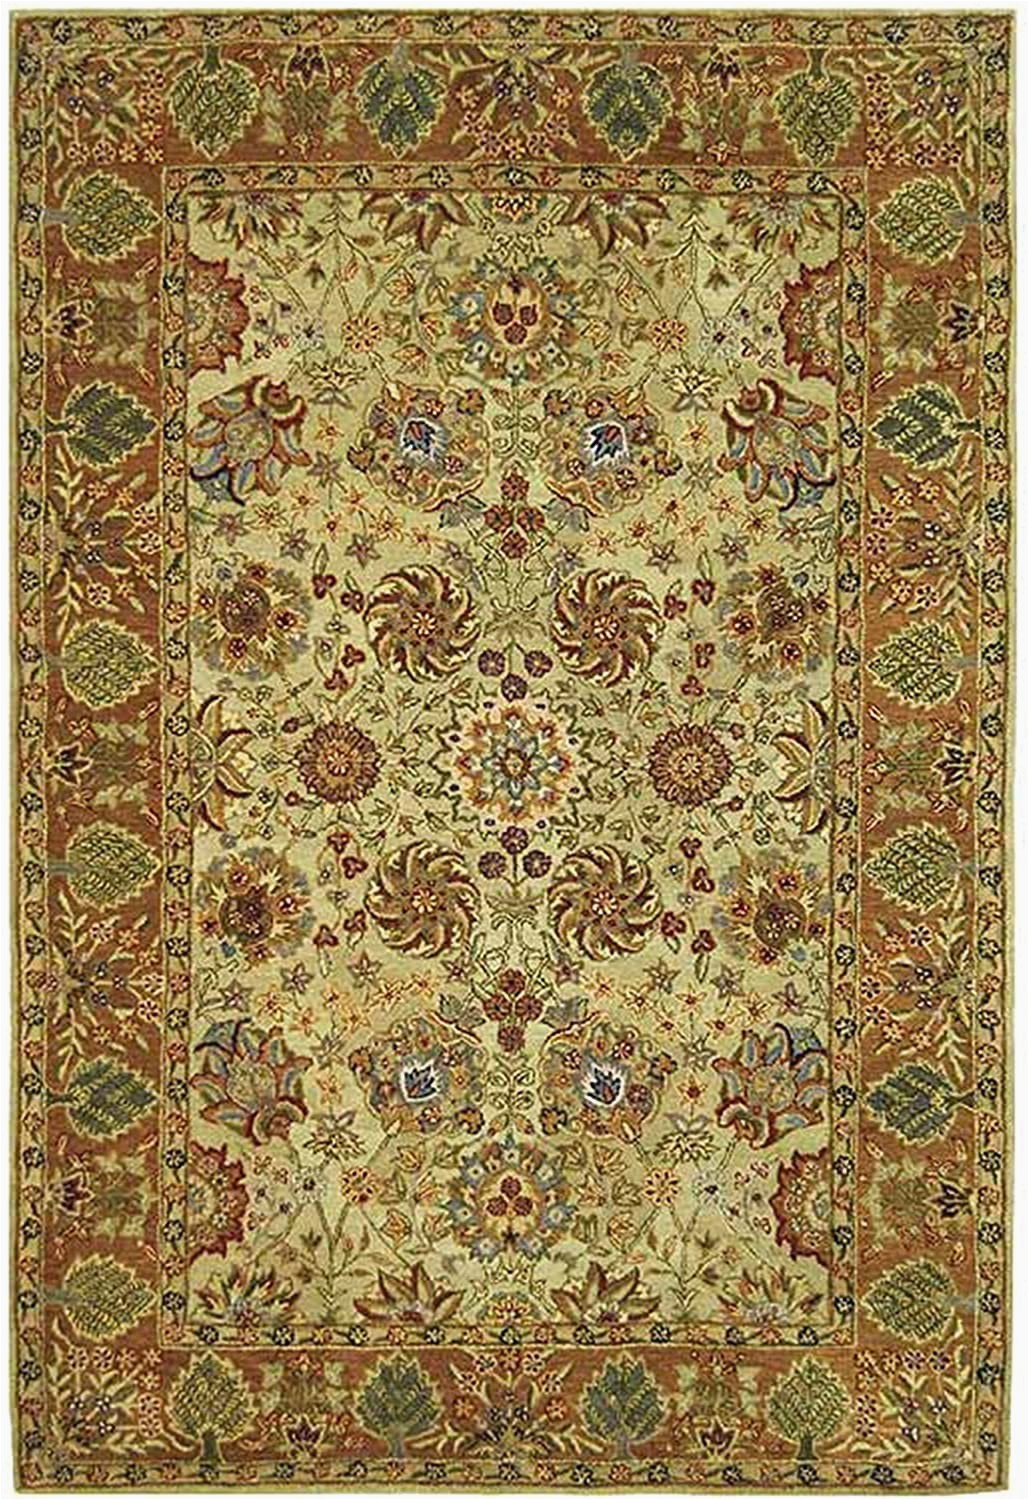 Green and Gold area Rugs Amazon Safavieh Anatolia An521a 4 Round Green Gold